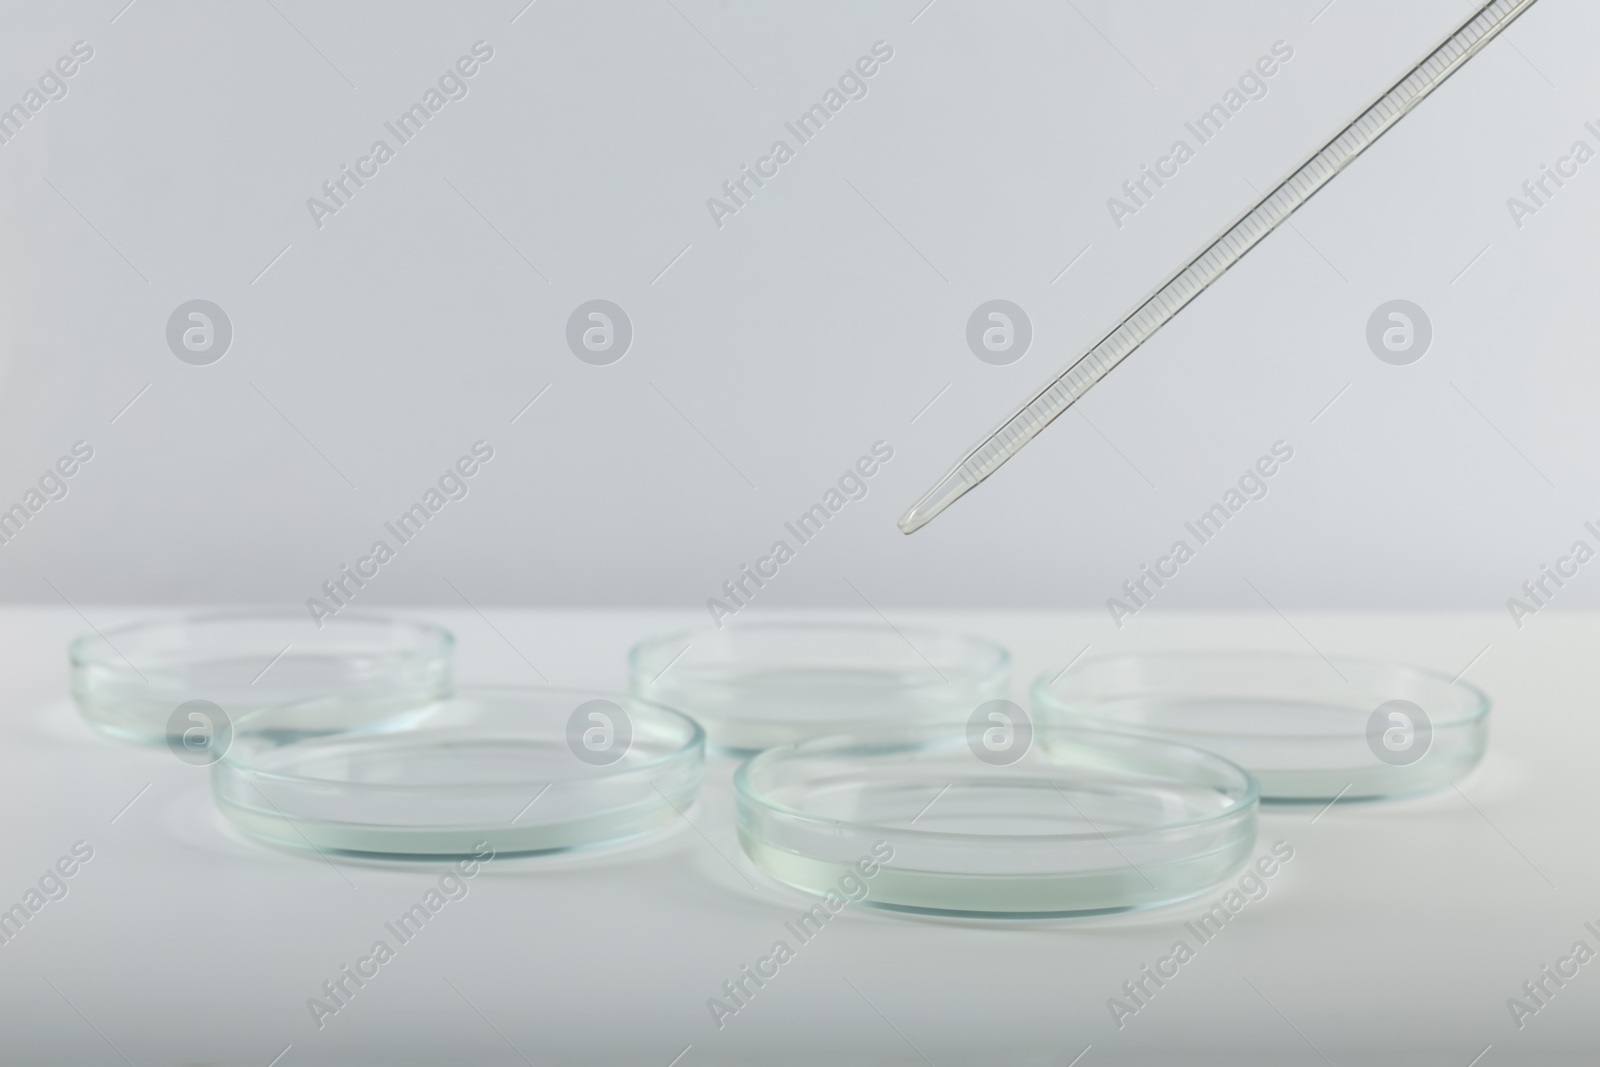 Photo of Pipette over petri dish on light background